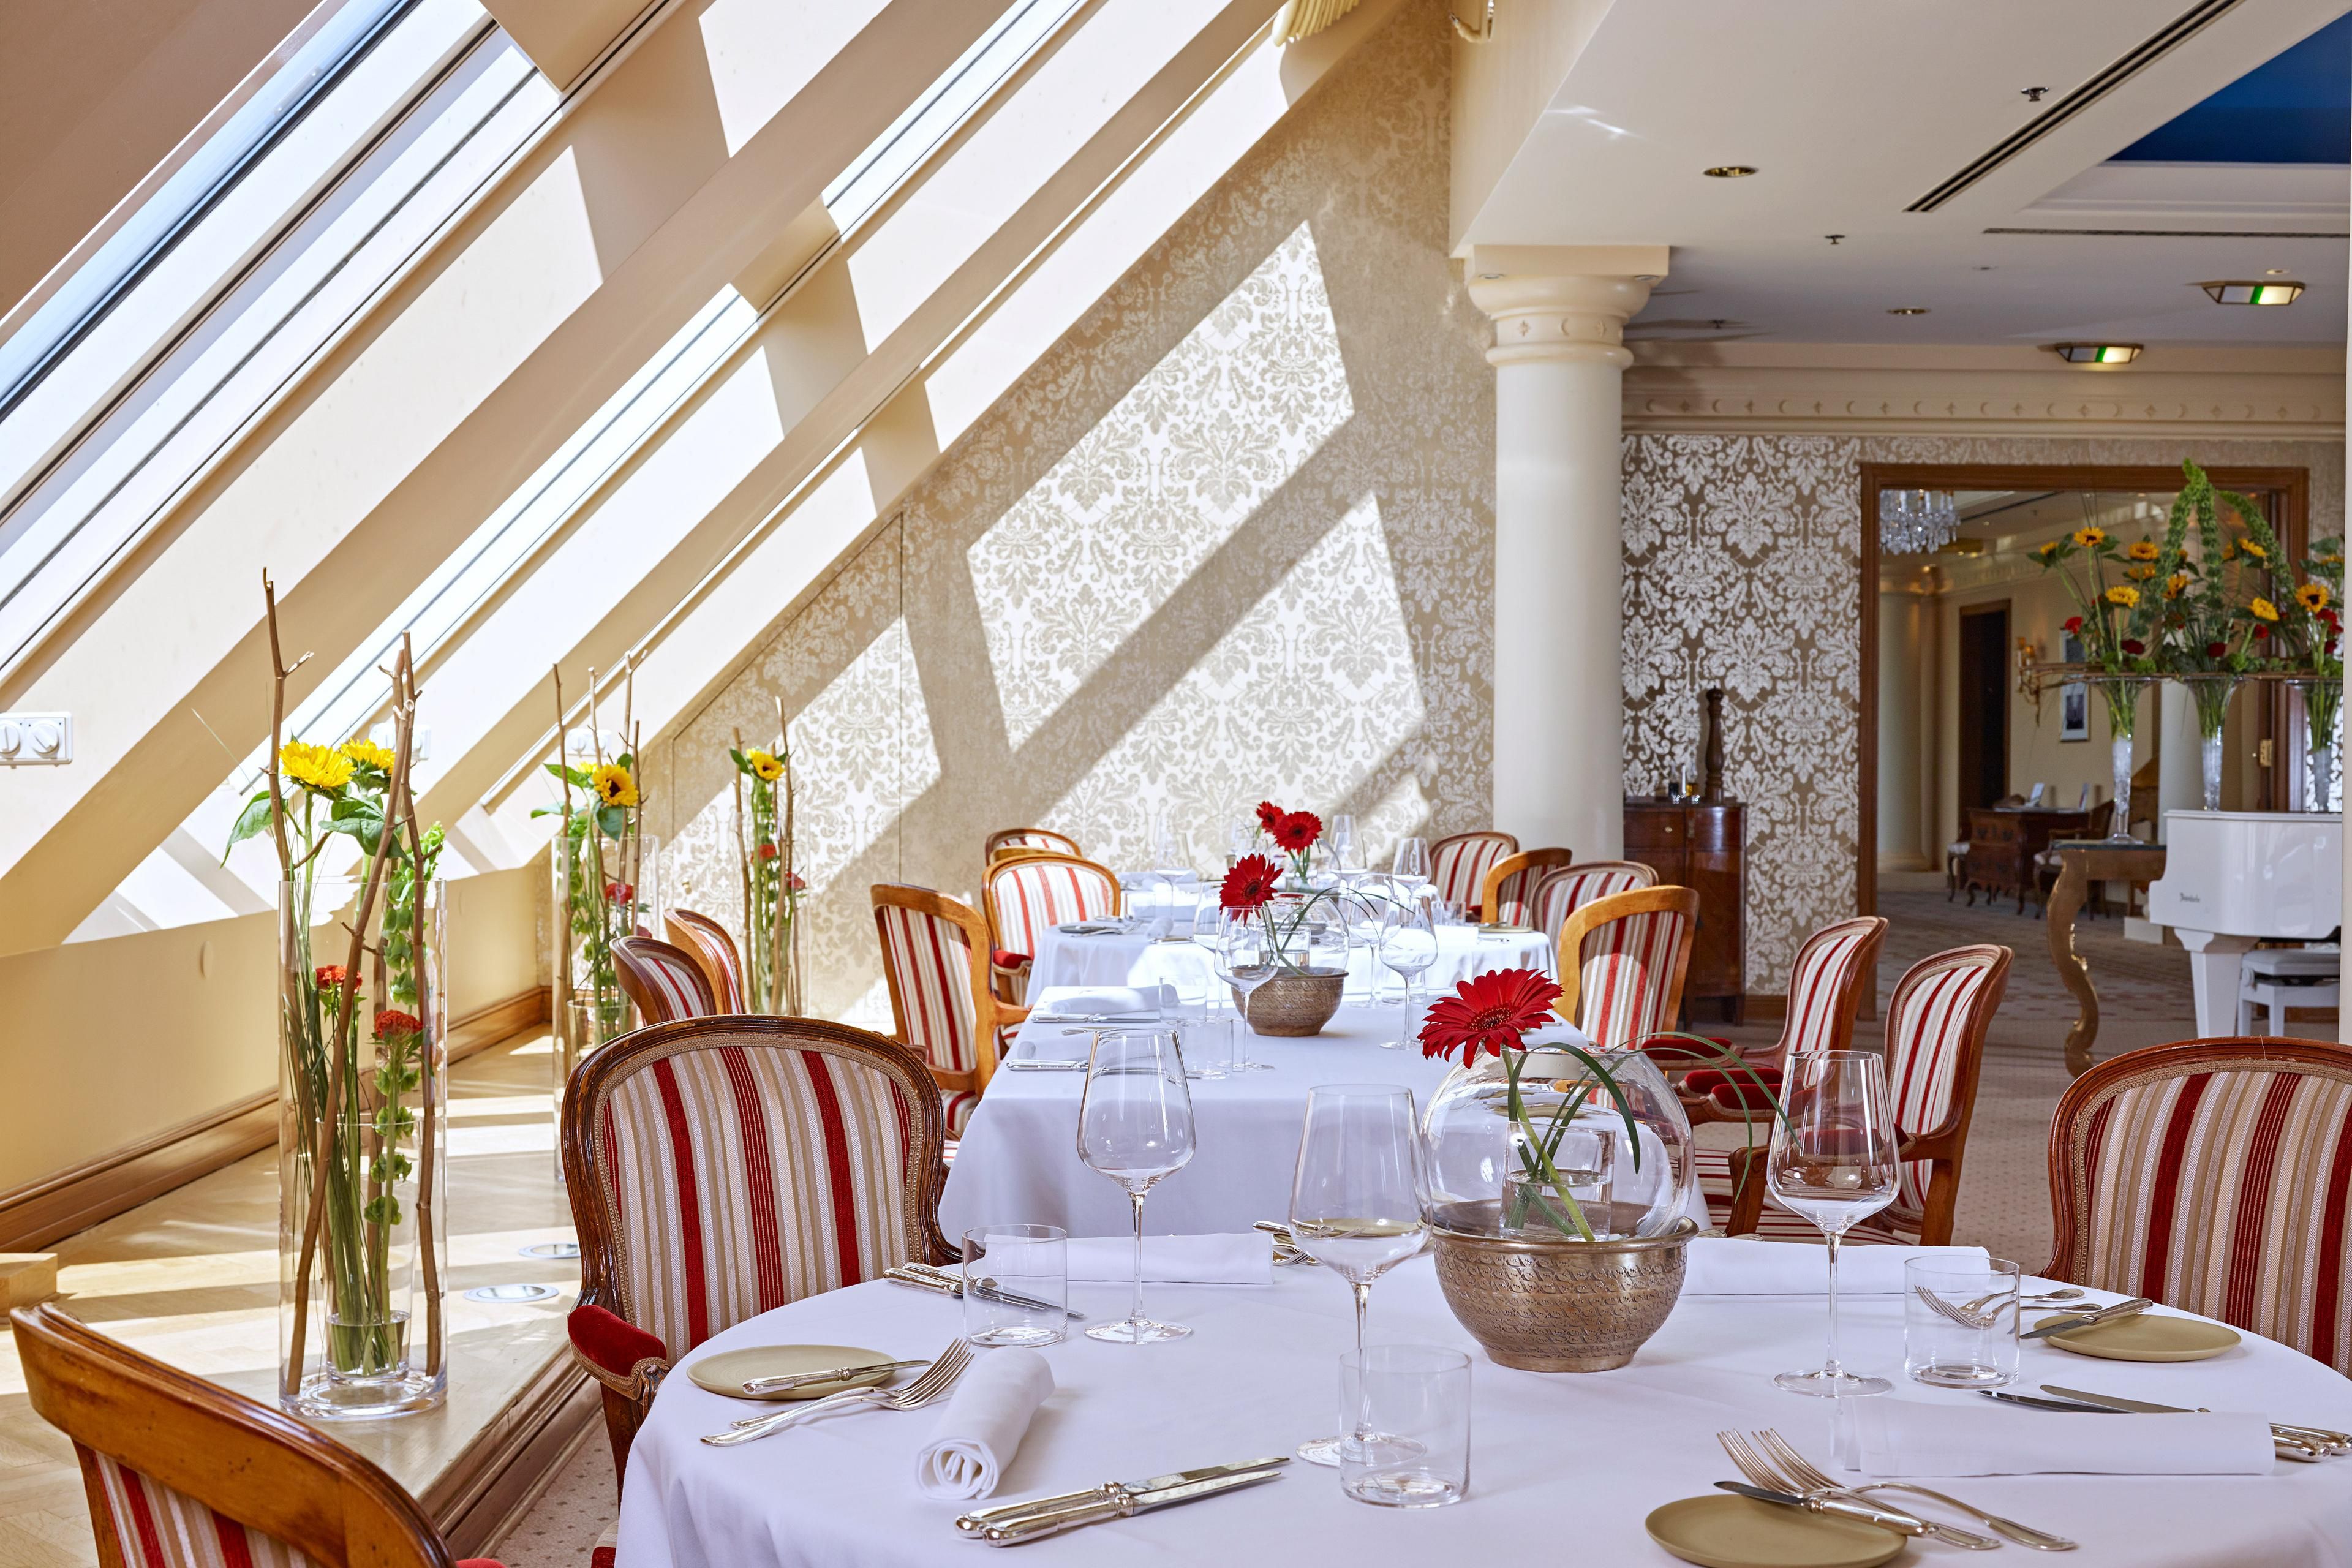 Enjoy high class cuisine in our 1870 Restaurant with an amazing view about Vienna